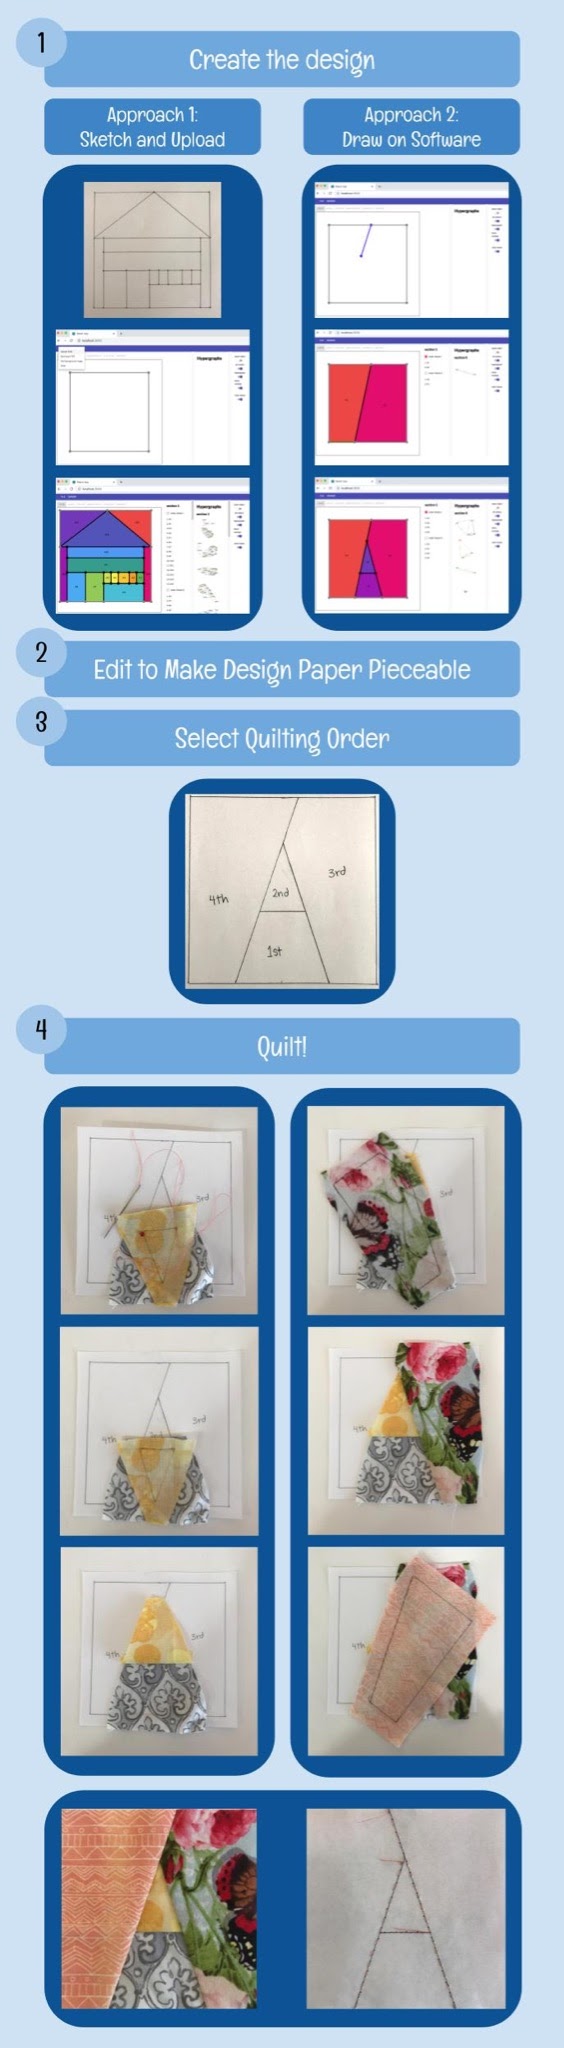 An infographic showing how the quilting algorithm is used.